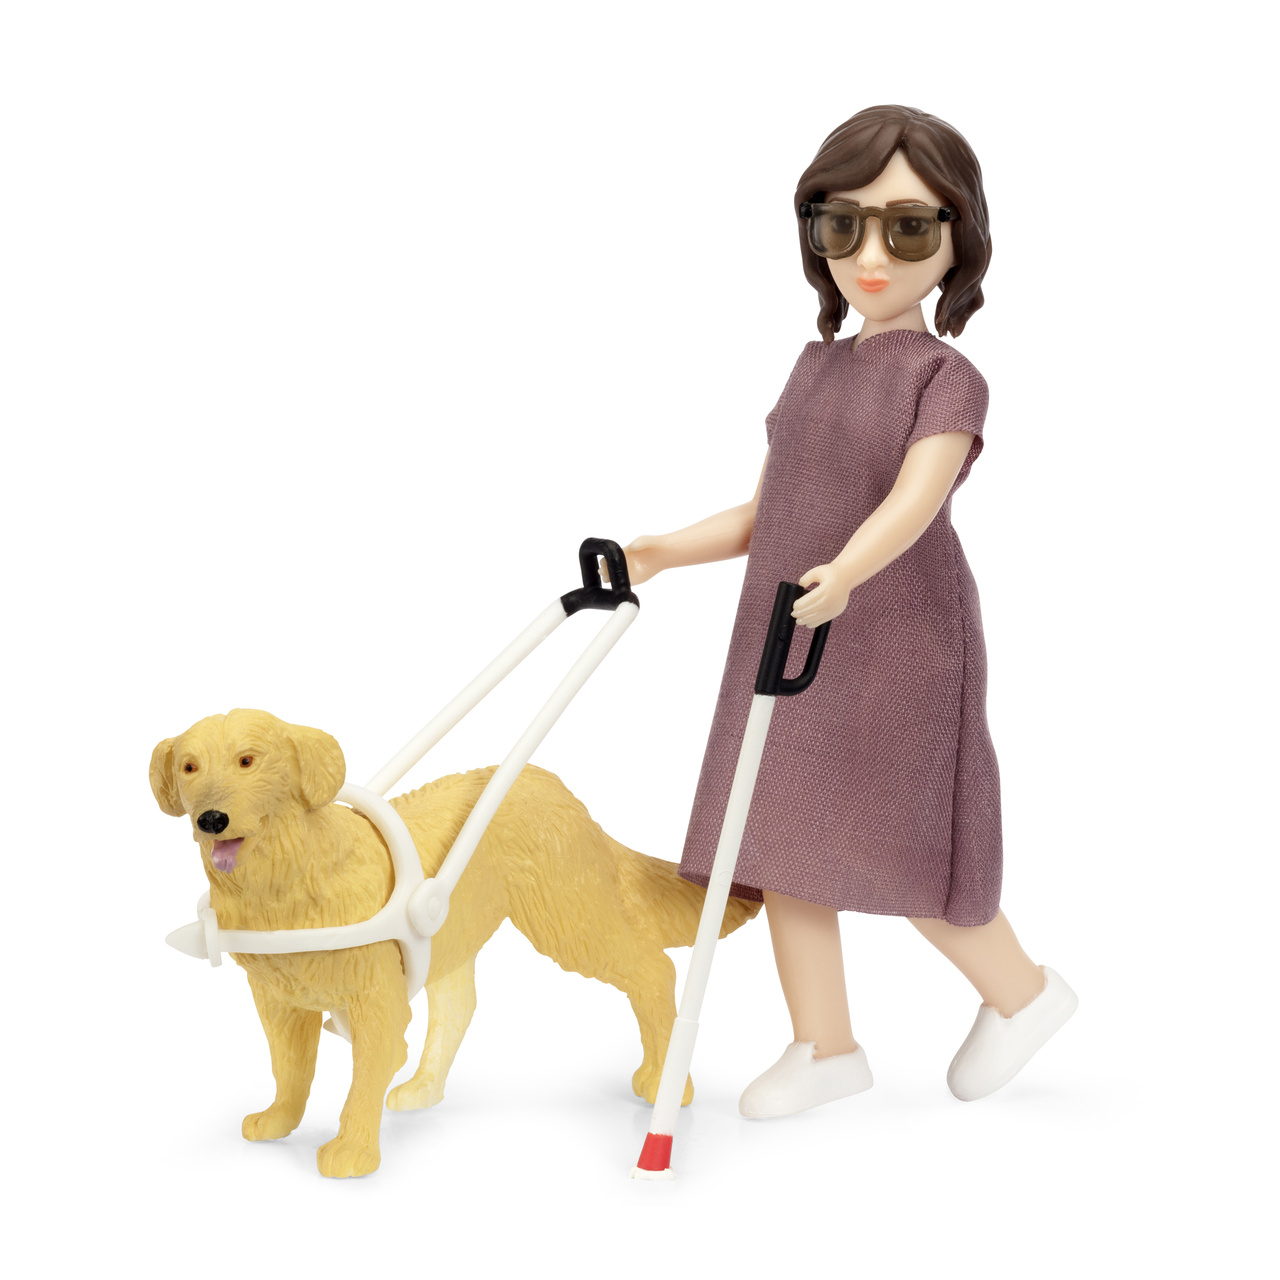 Doll, Cane And Guide Dog | Lundby